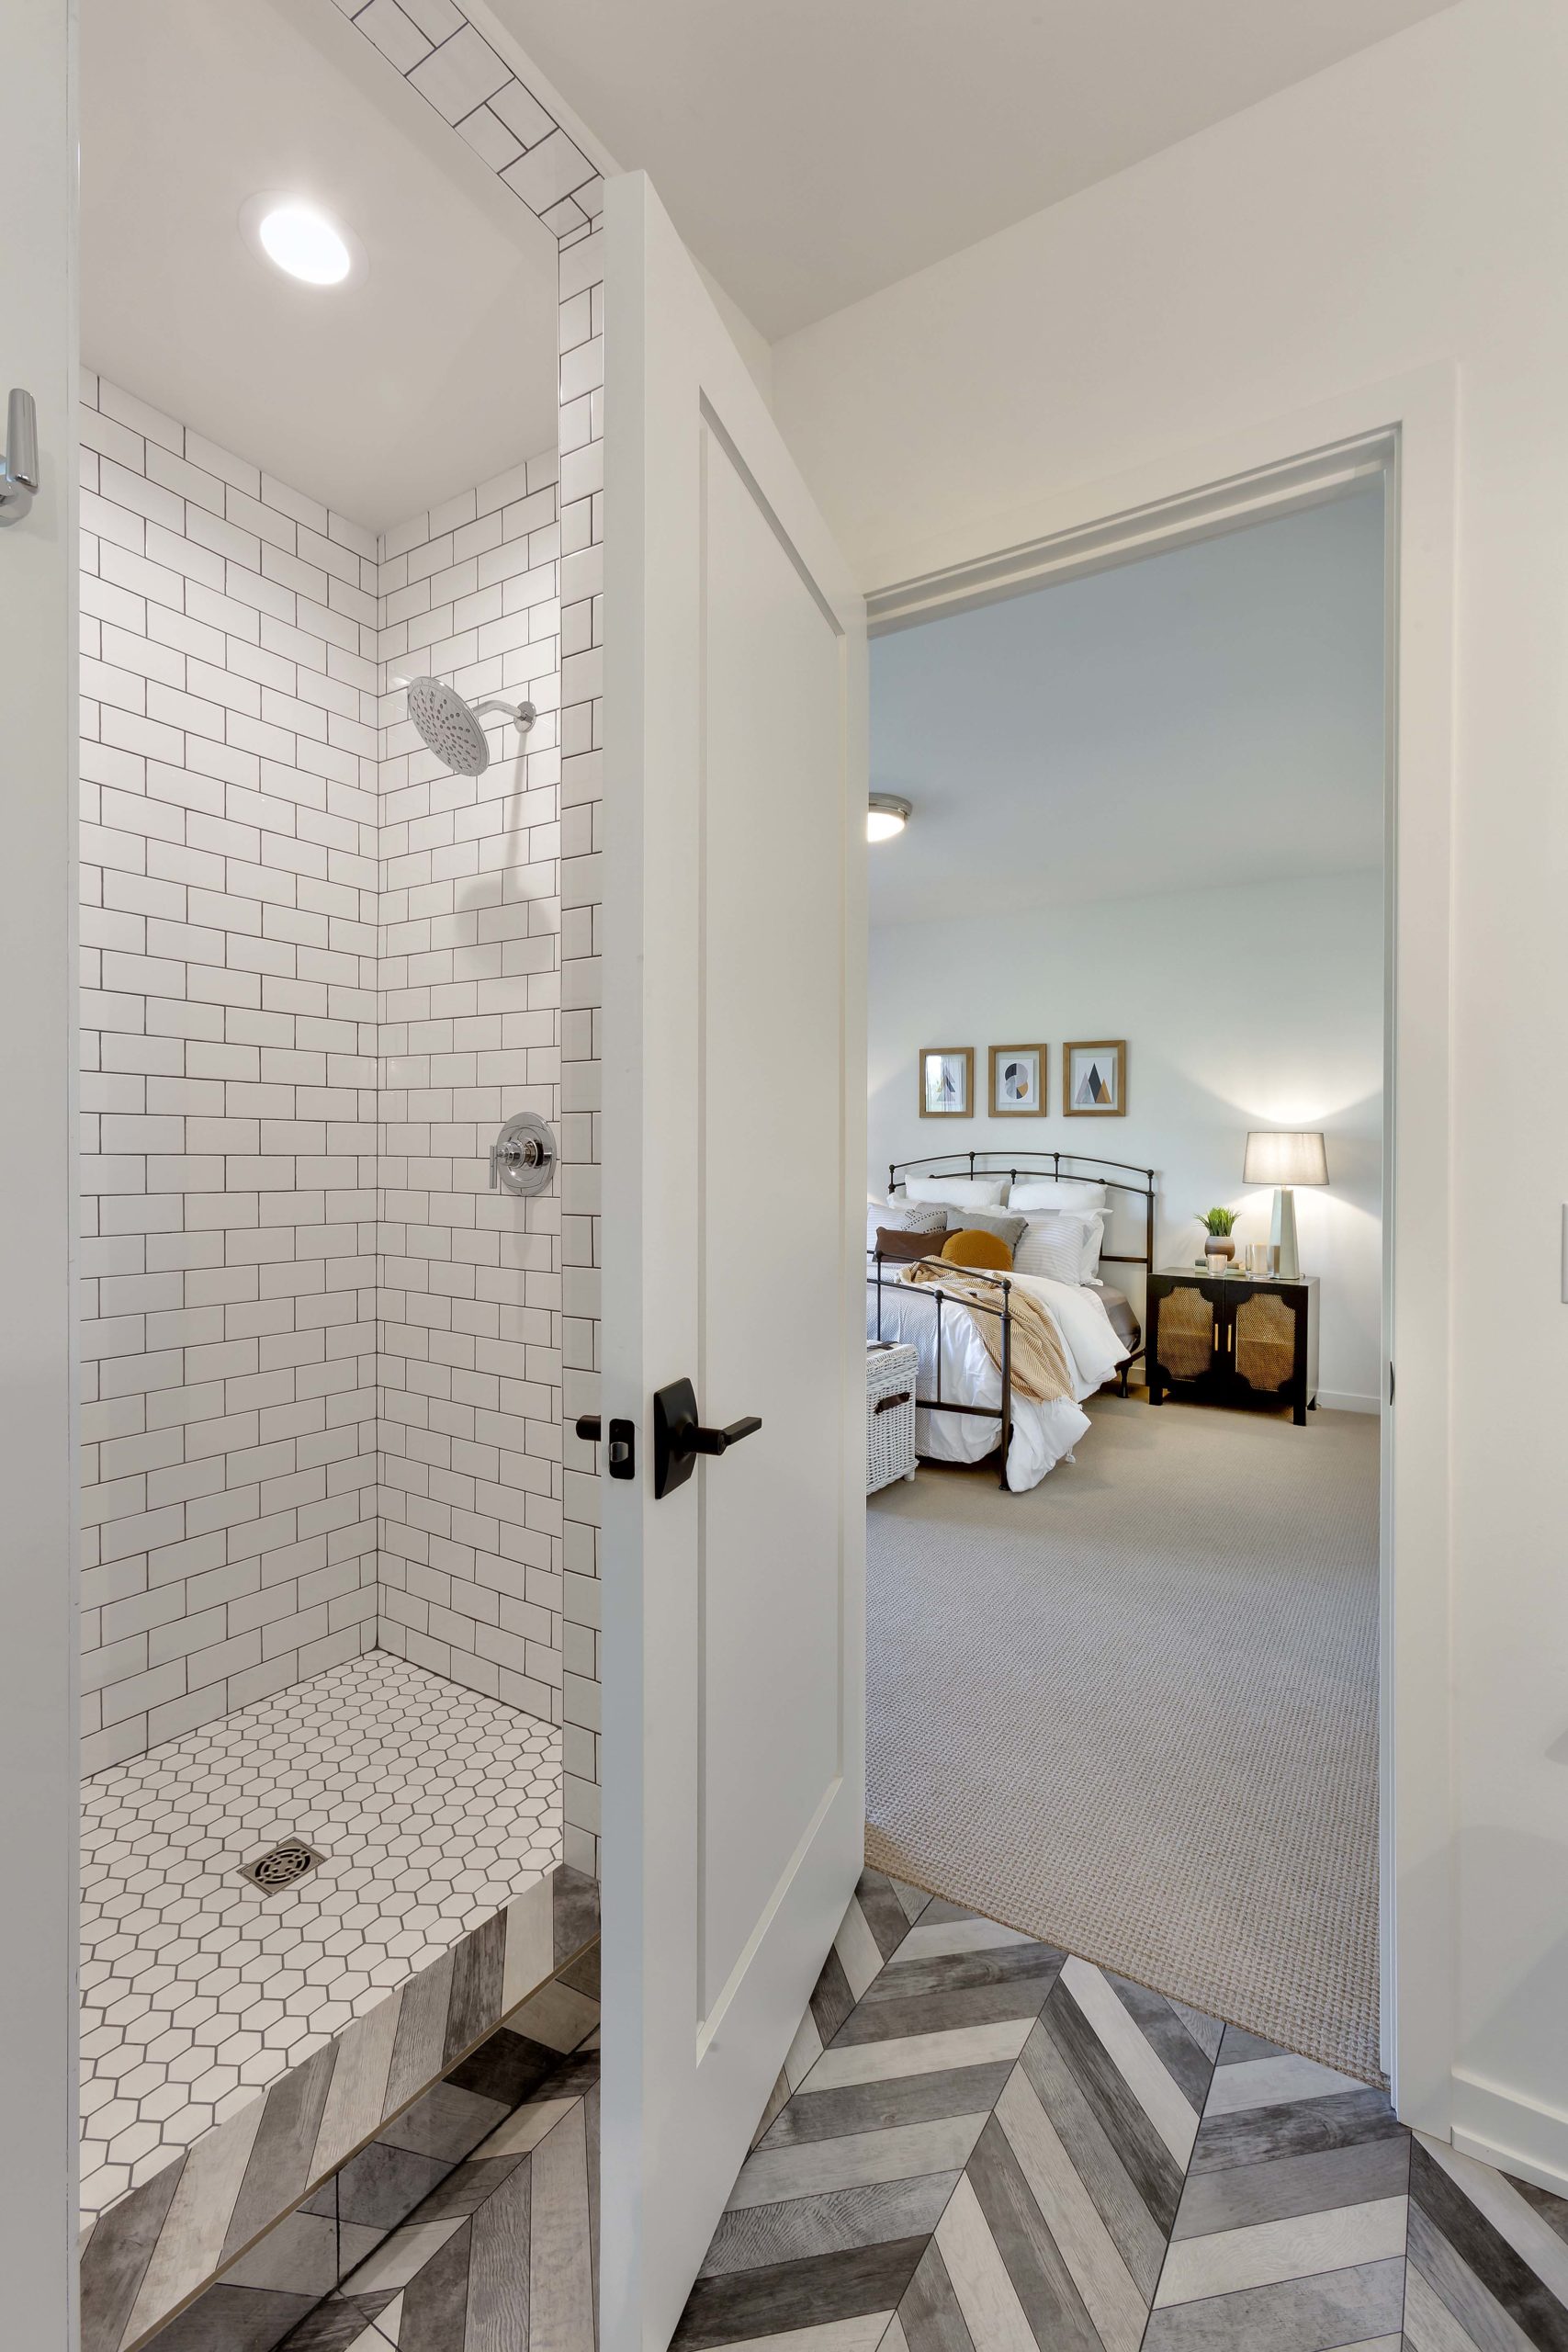 A Reverence farmhouse bathroom in Lakeville, Minnesota featuring a shower and a chevron tile floor.